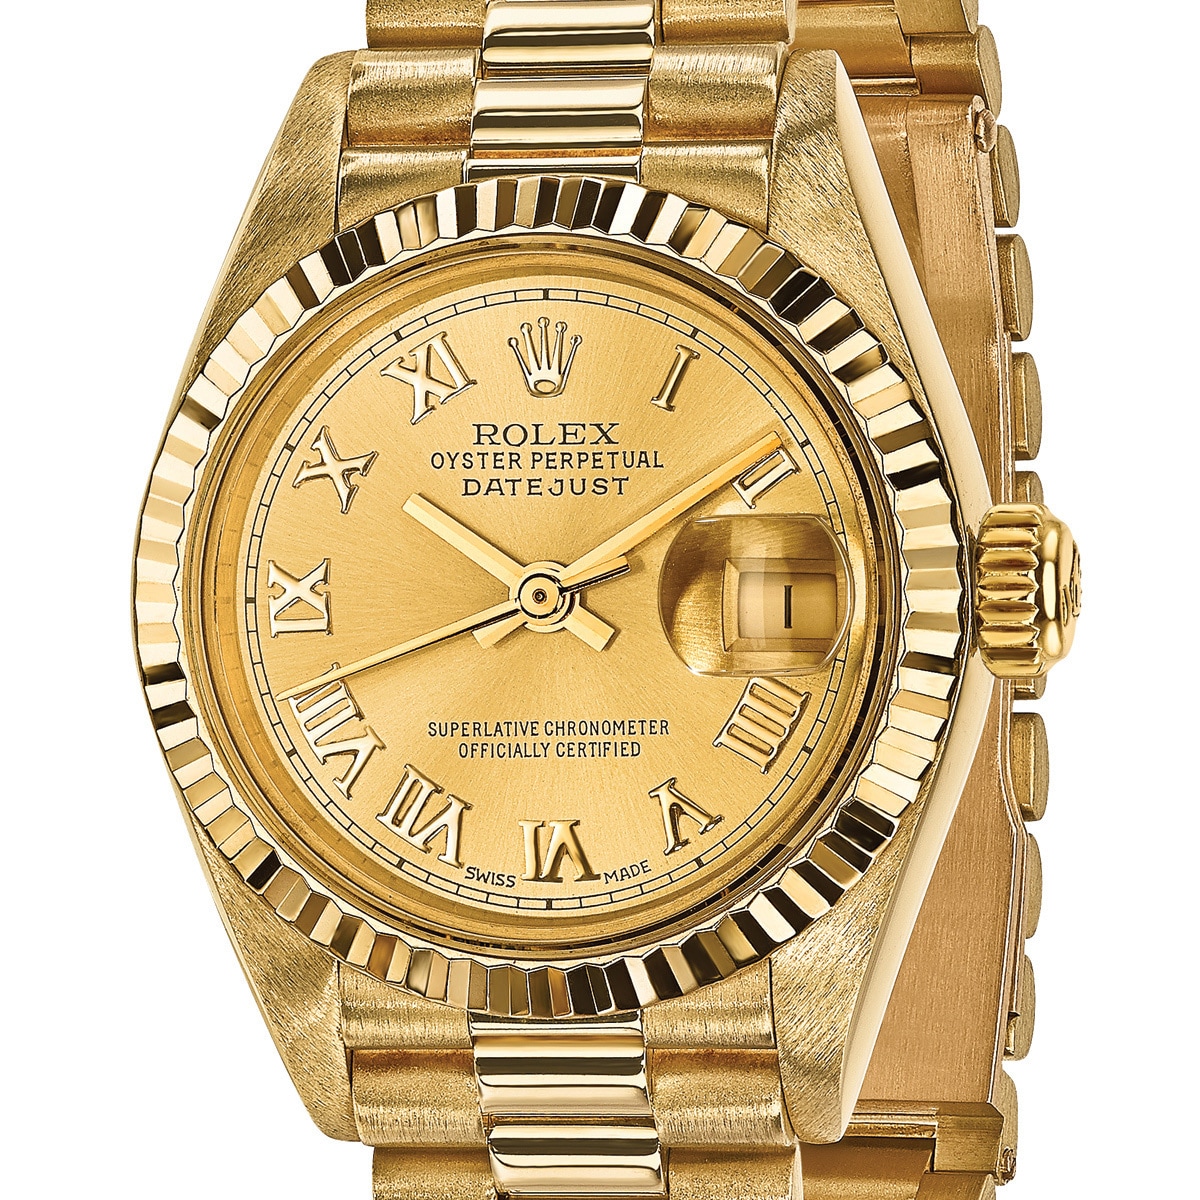 women's pre owned rolex watches